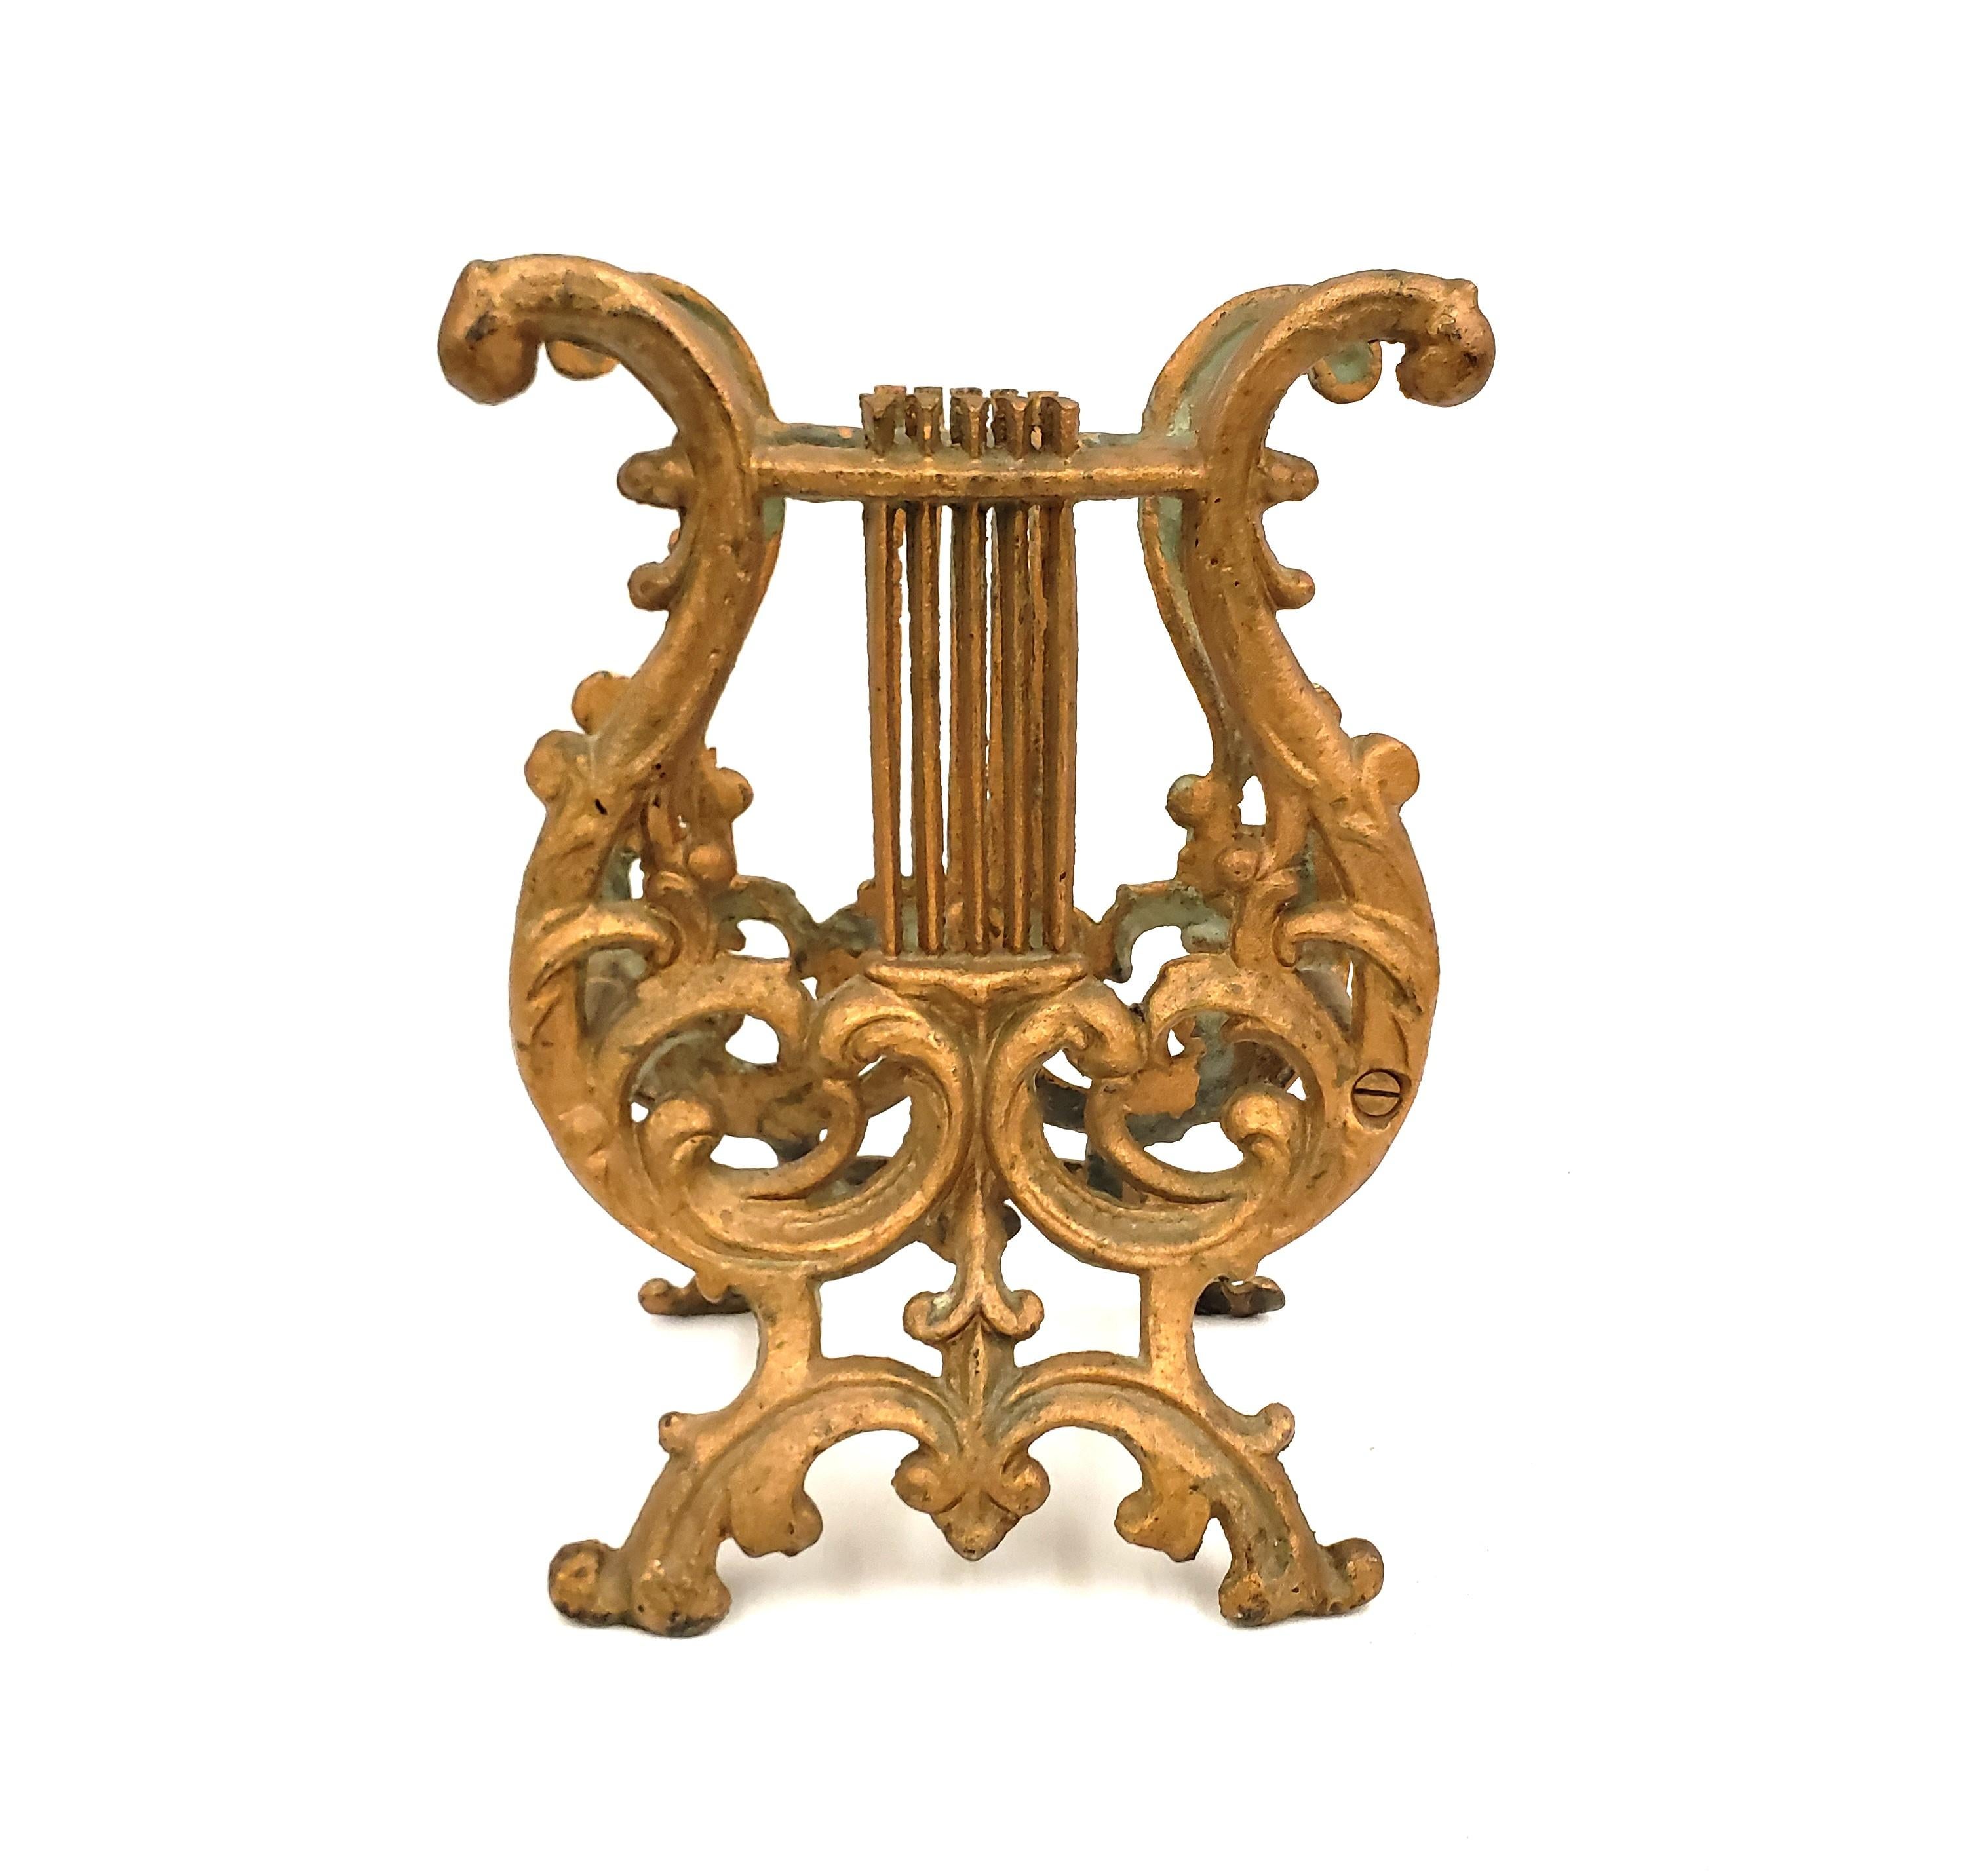 This antique book stand is unsigned, but presumed to have originated from the United States and date to approximately 1920 and done in the period style. The stand is composed of a cast metal lyre on both ends with a sturdy base and gilt finish.